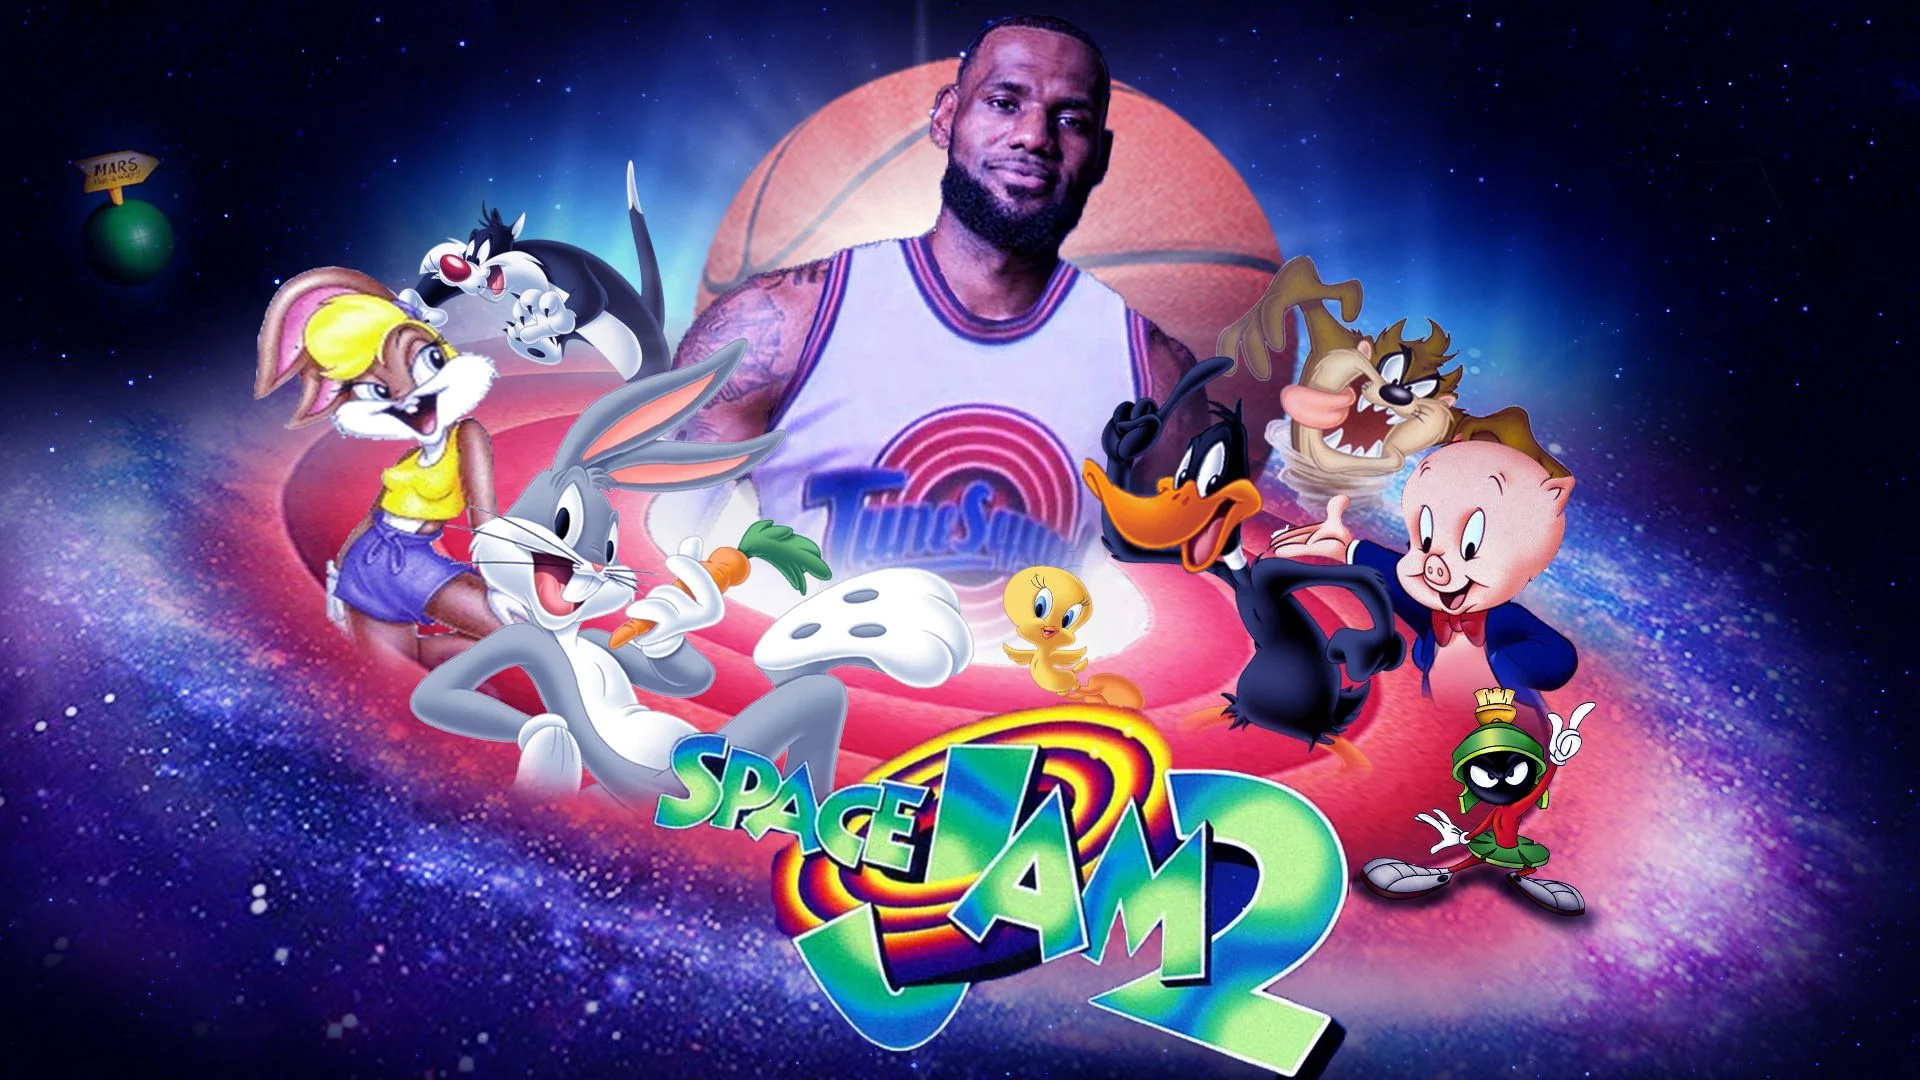 Looney Tunes basketball, High-quality wallpapers, 1920x1080 Full HD Desktop